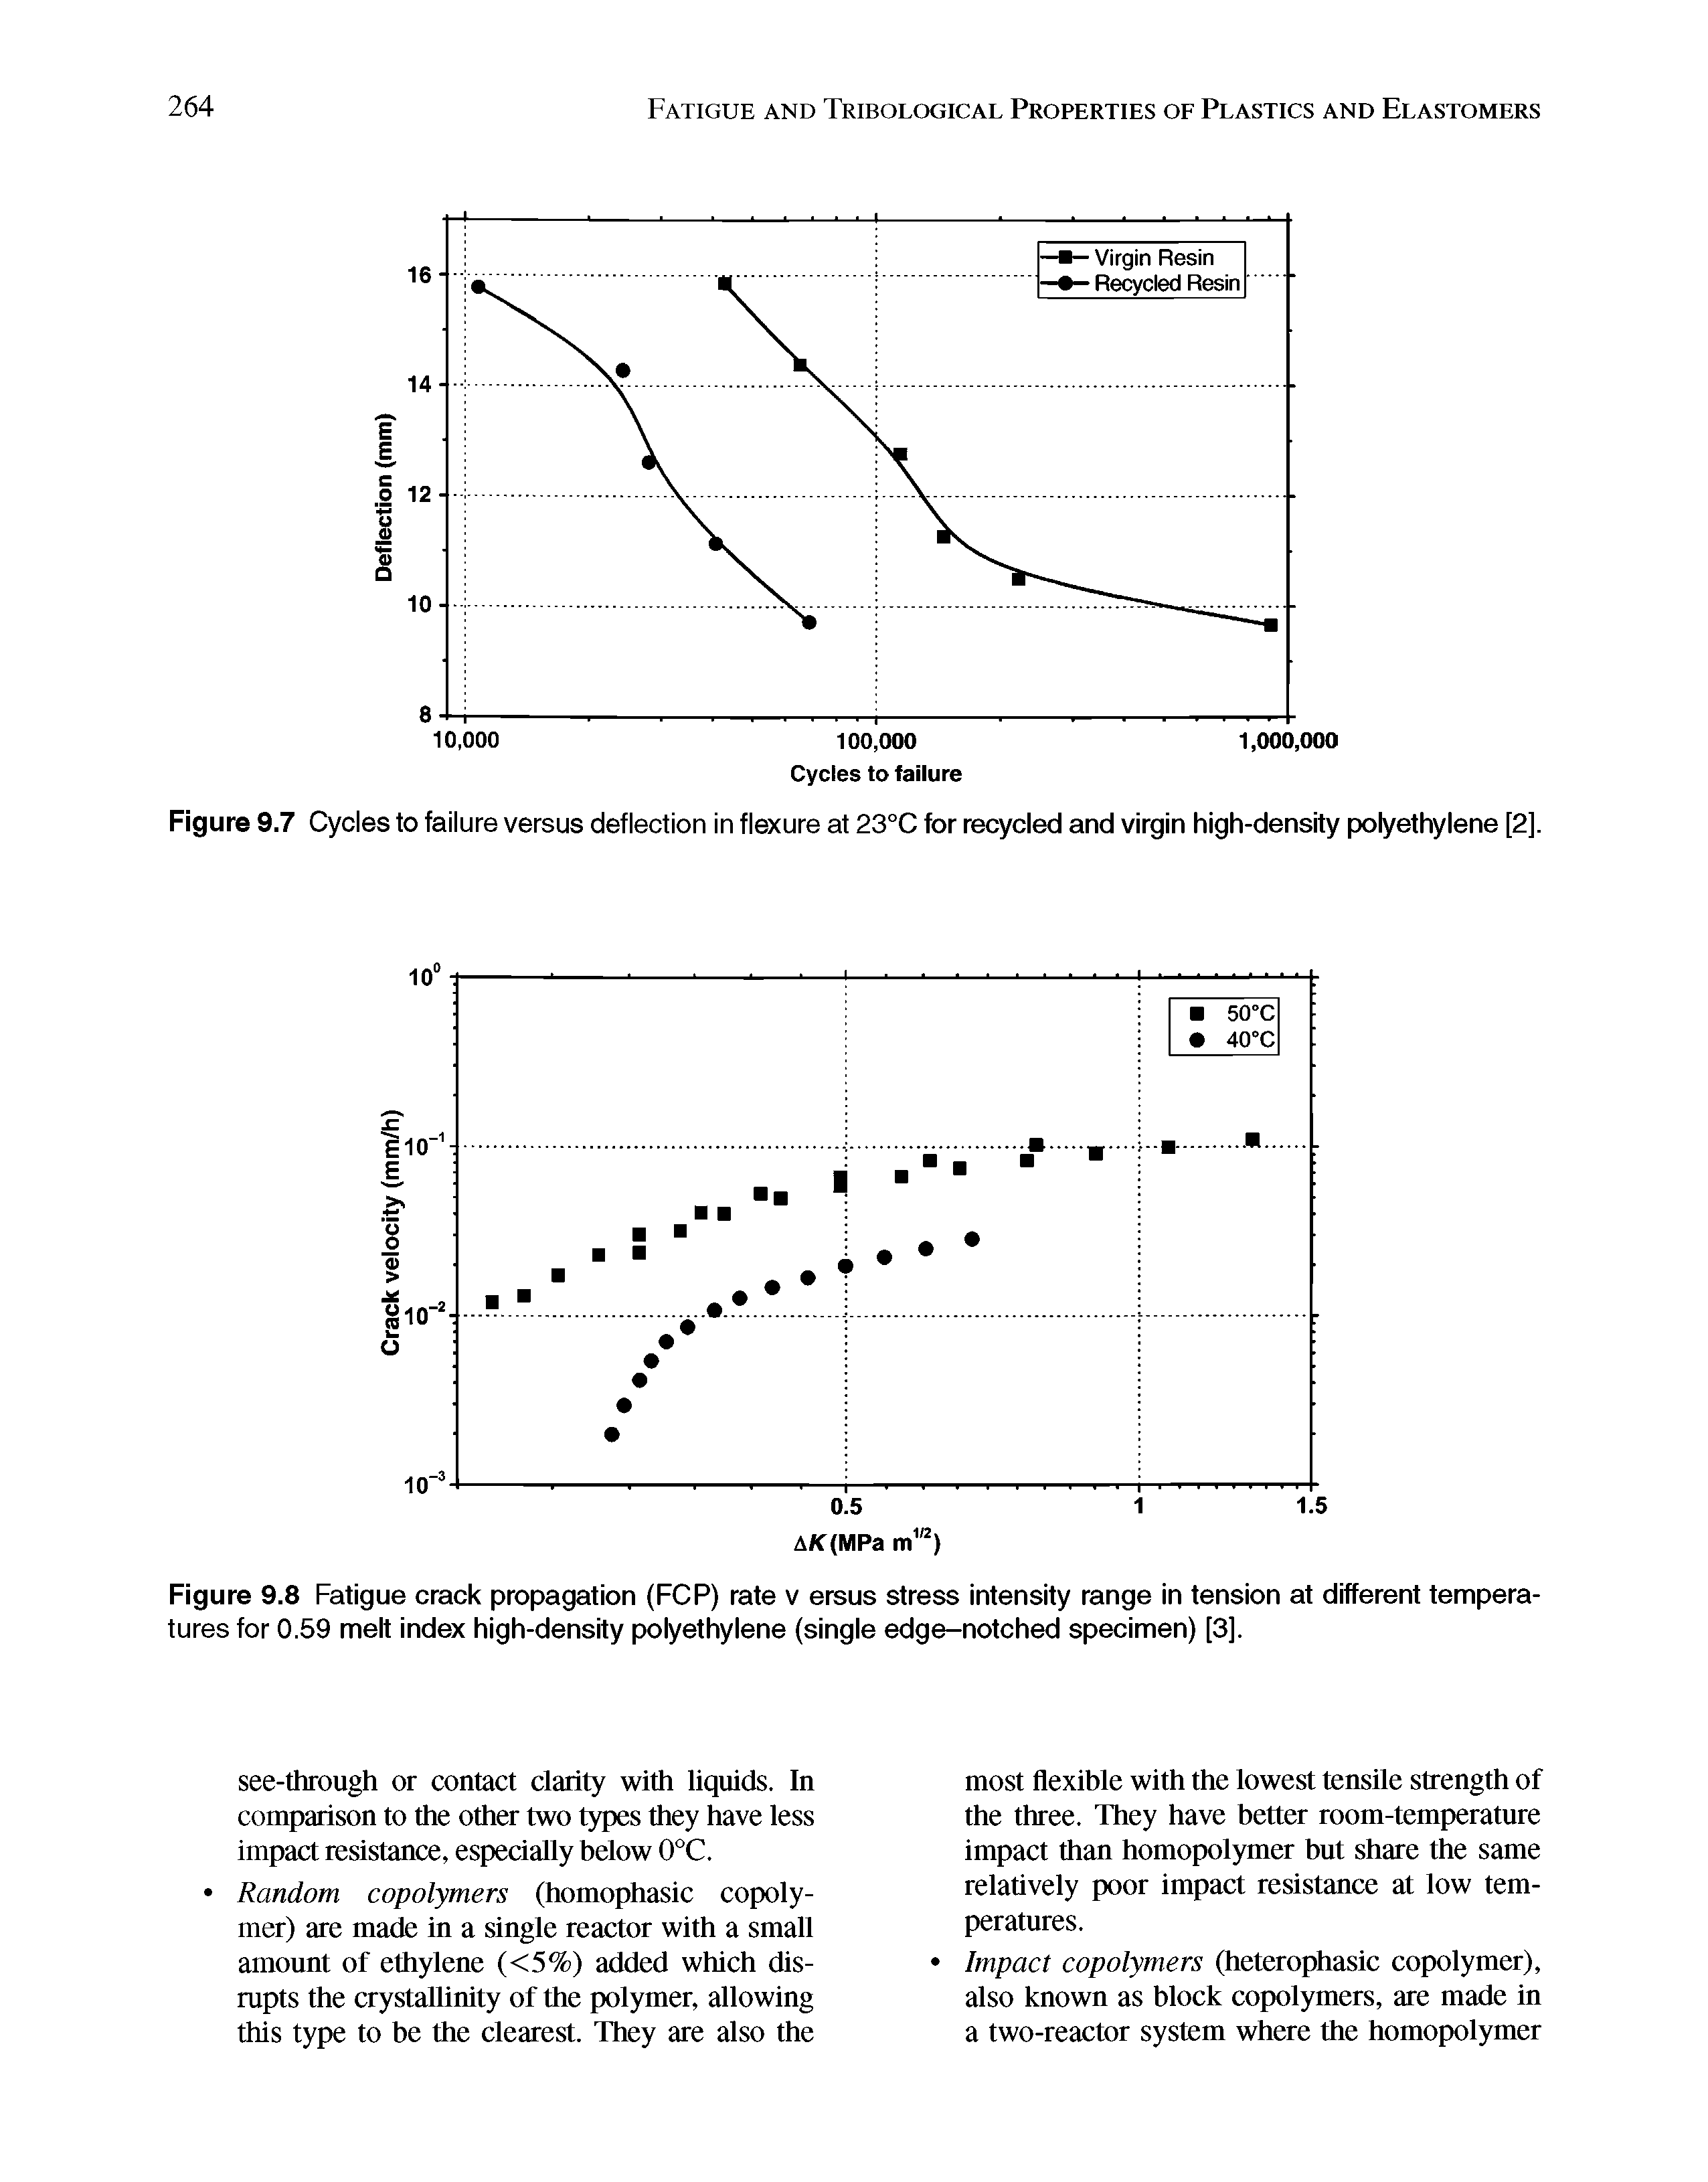 Figure 9.7 Cycles to failure versus deflection in flexure at 23°C for recycled and virgin high-density polyethylene [2].